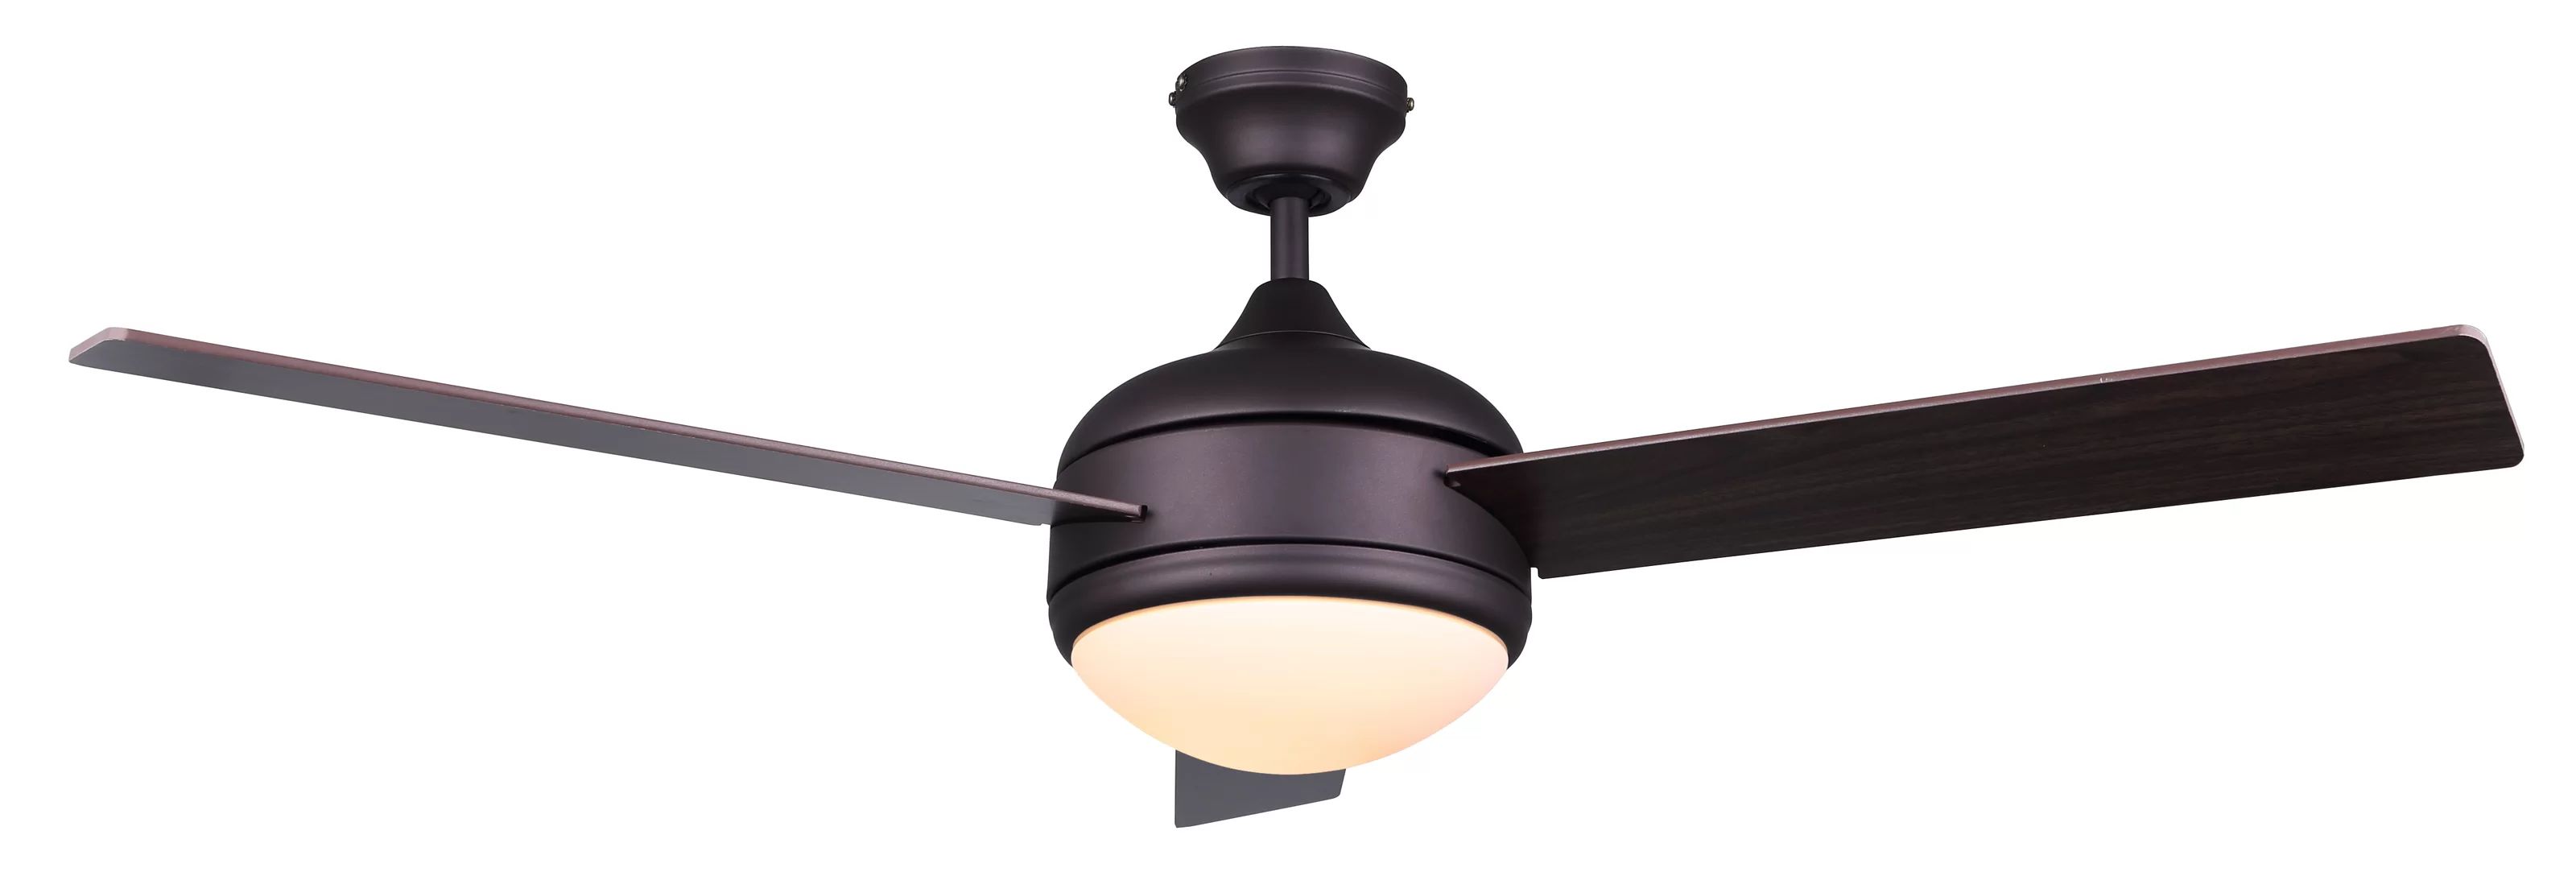 48" Kandi 3 - Blade Standard Ceiling Fan with Remote Control and Light Kit Included | Wayfair North America